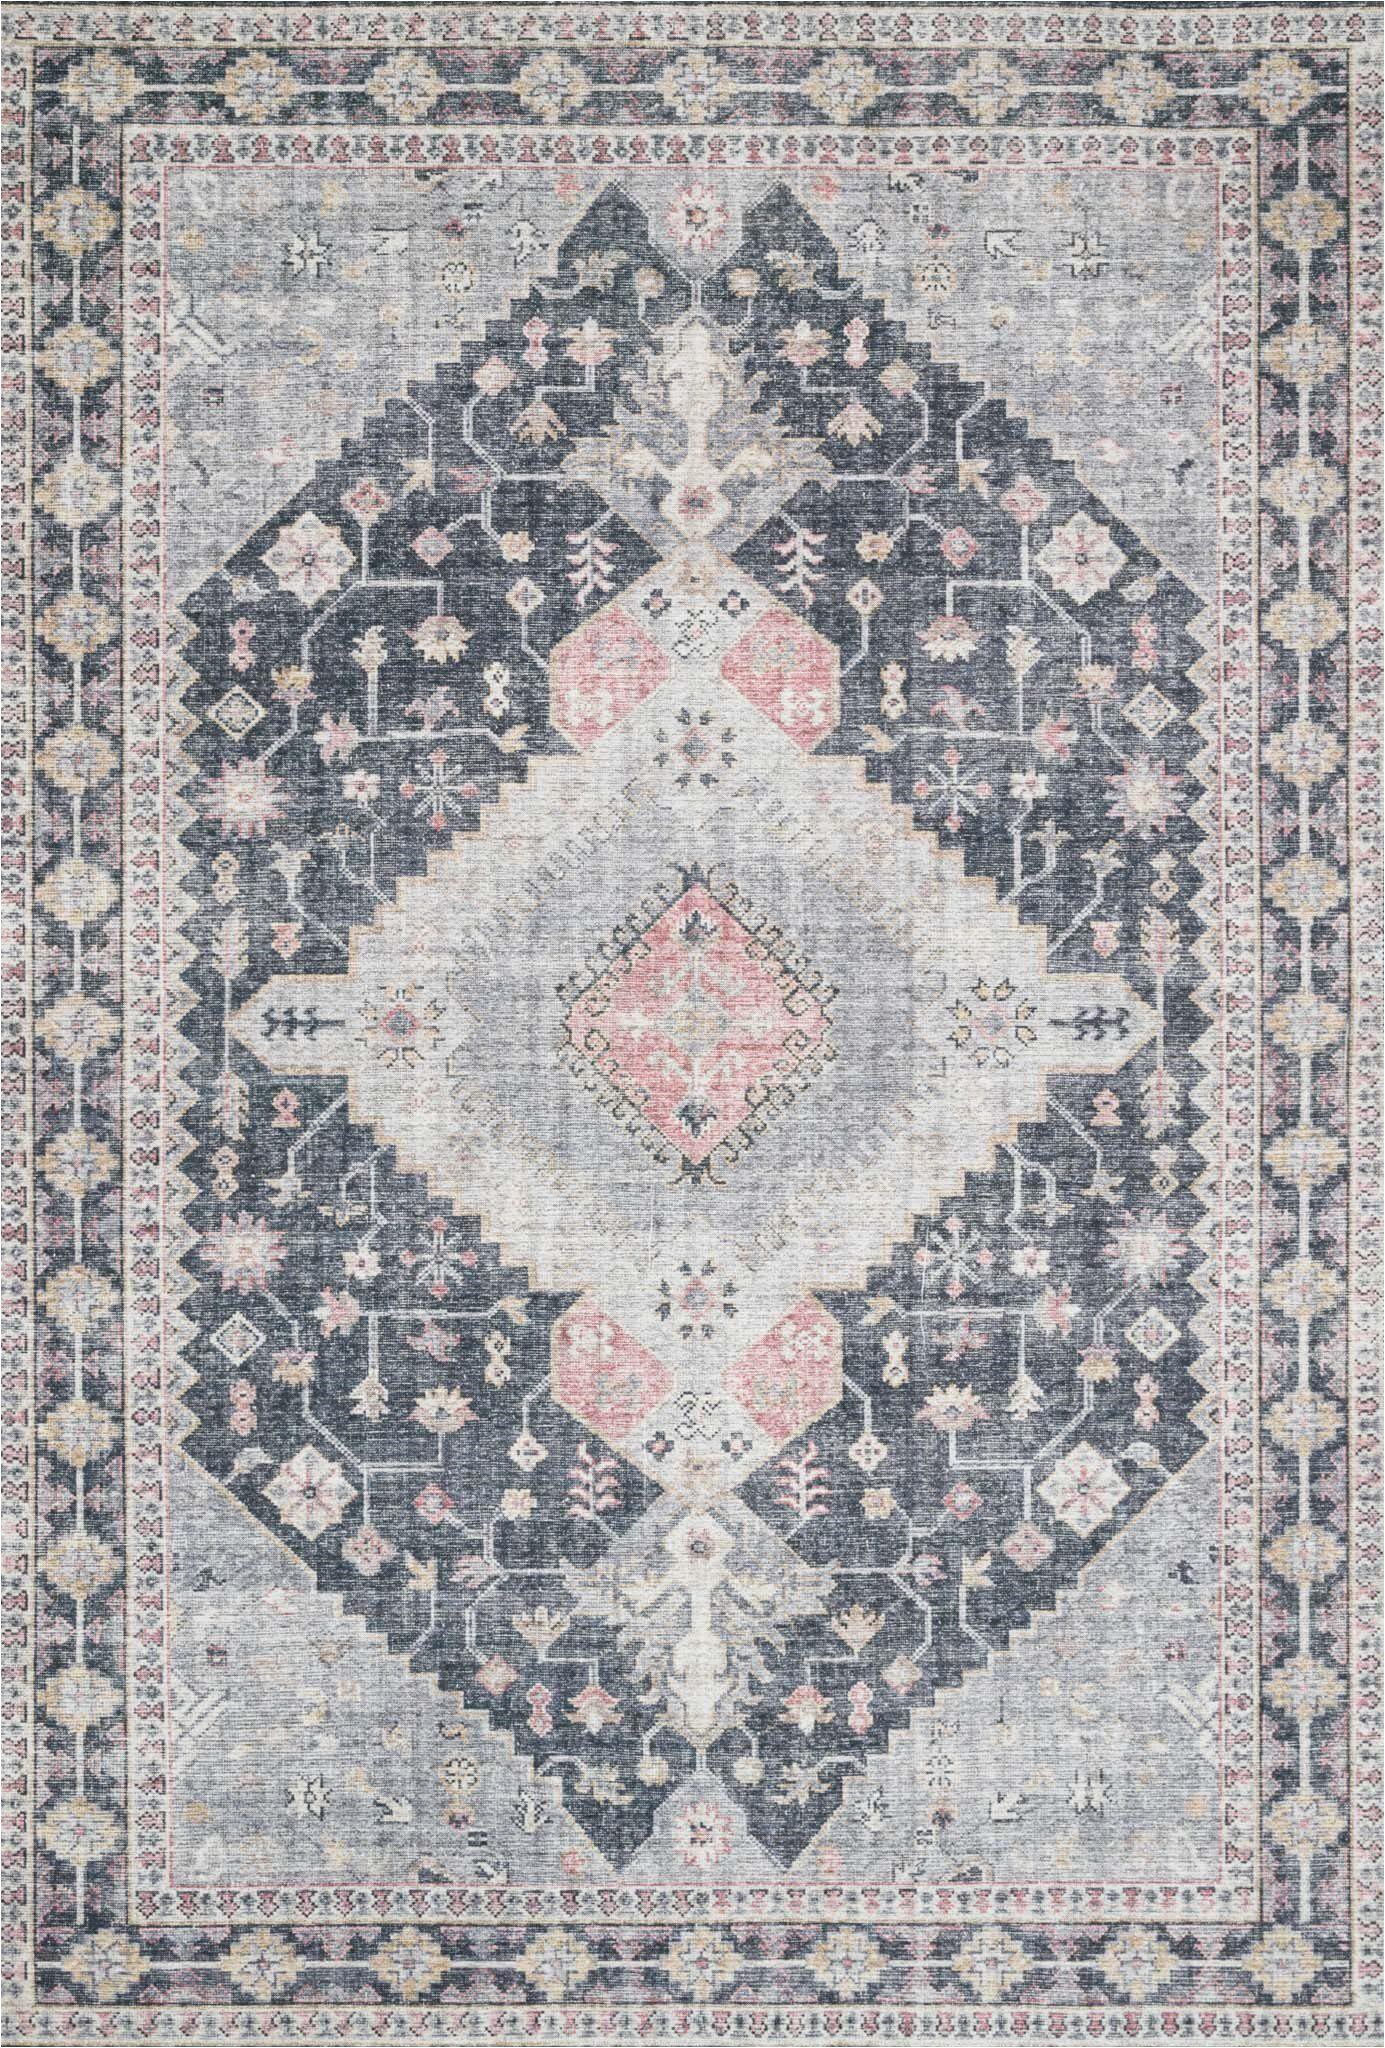 Blush and Gold area Rug Tribal Style area Rugs